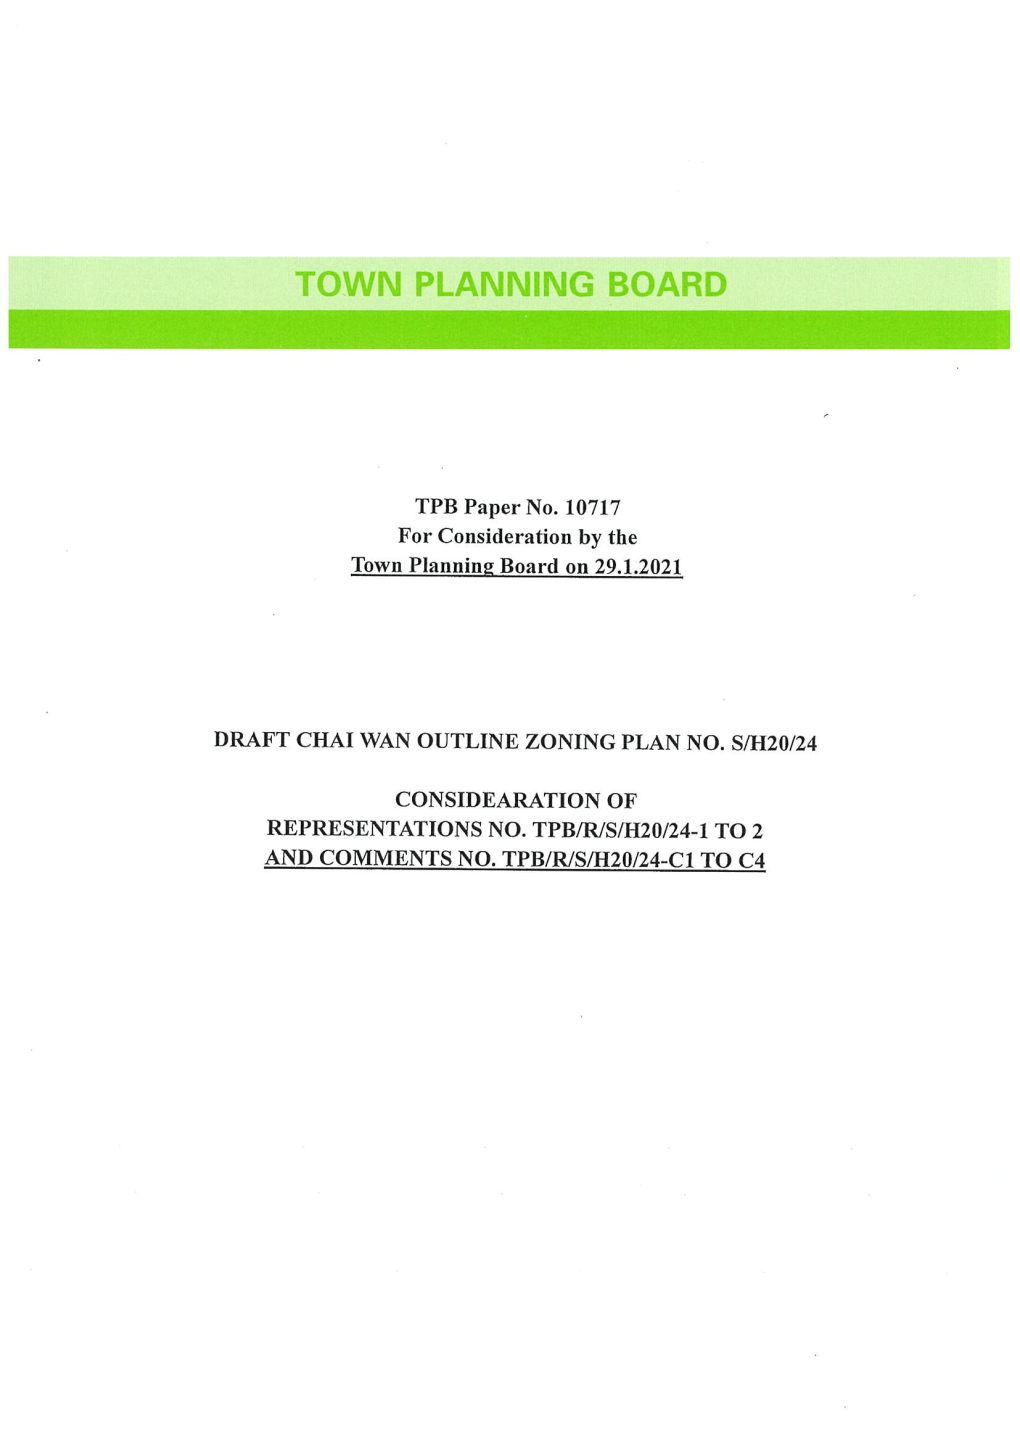 Town Planning Board Paper No. 10717